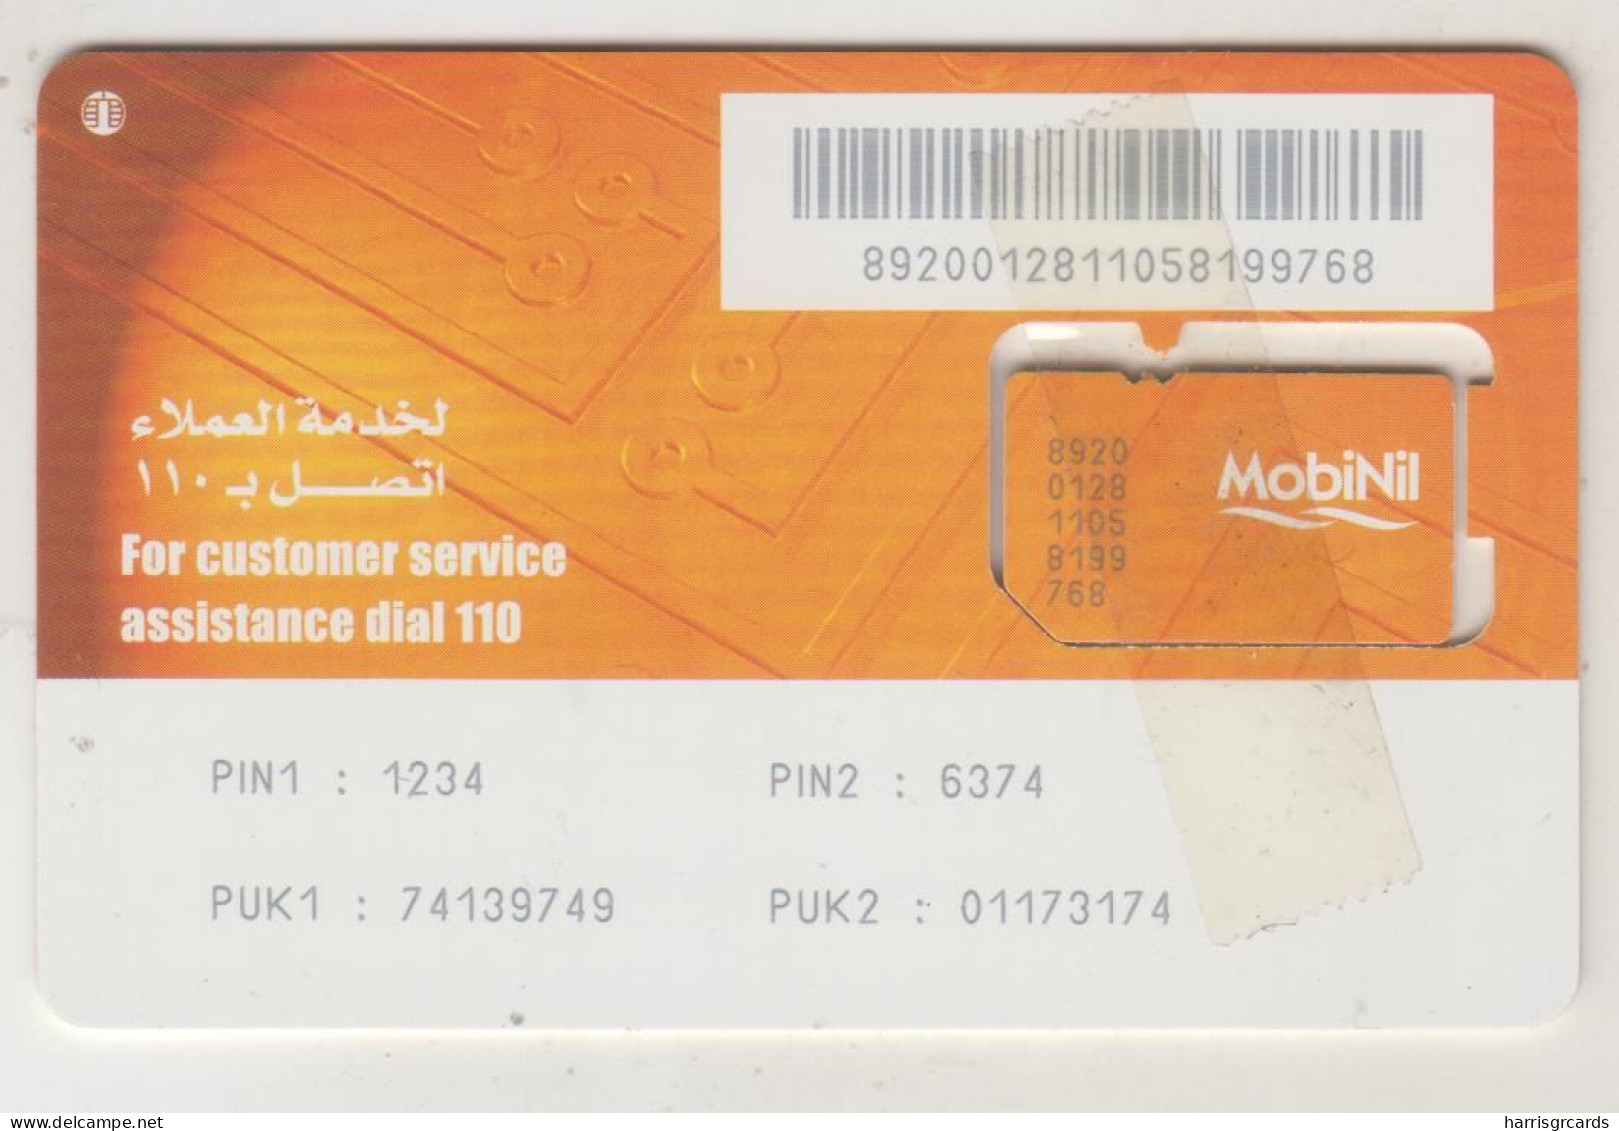 EGYPT - MobiNil GSM Card, Used - Egypt